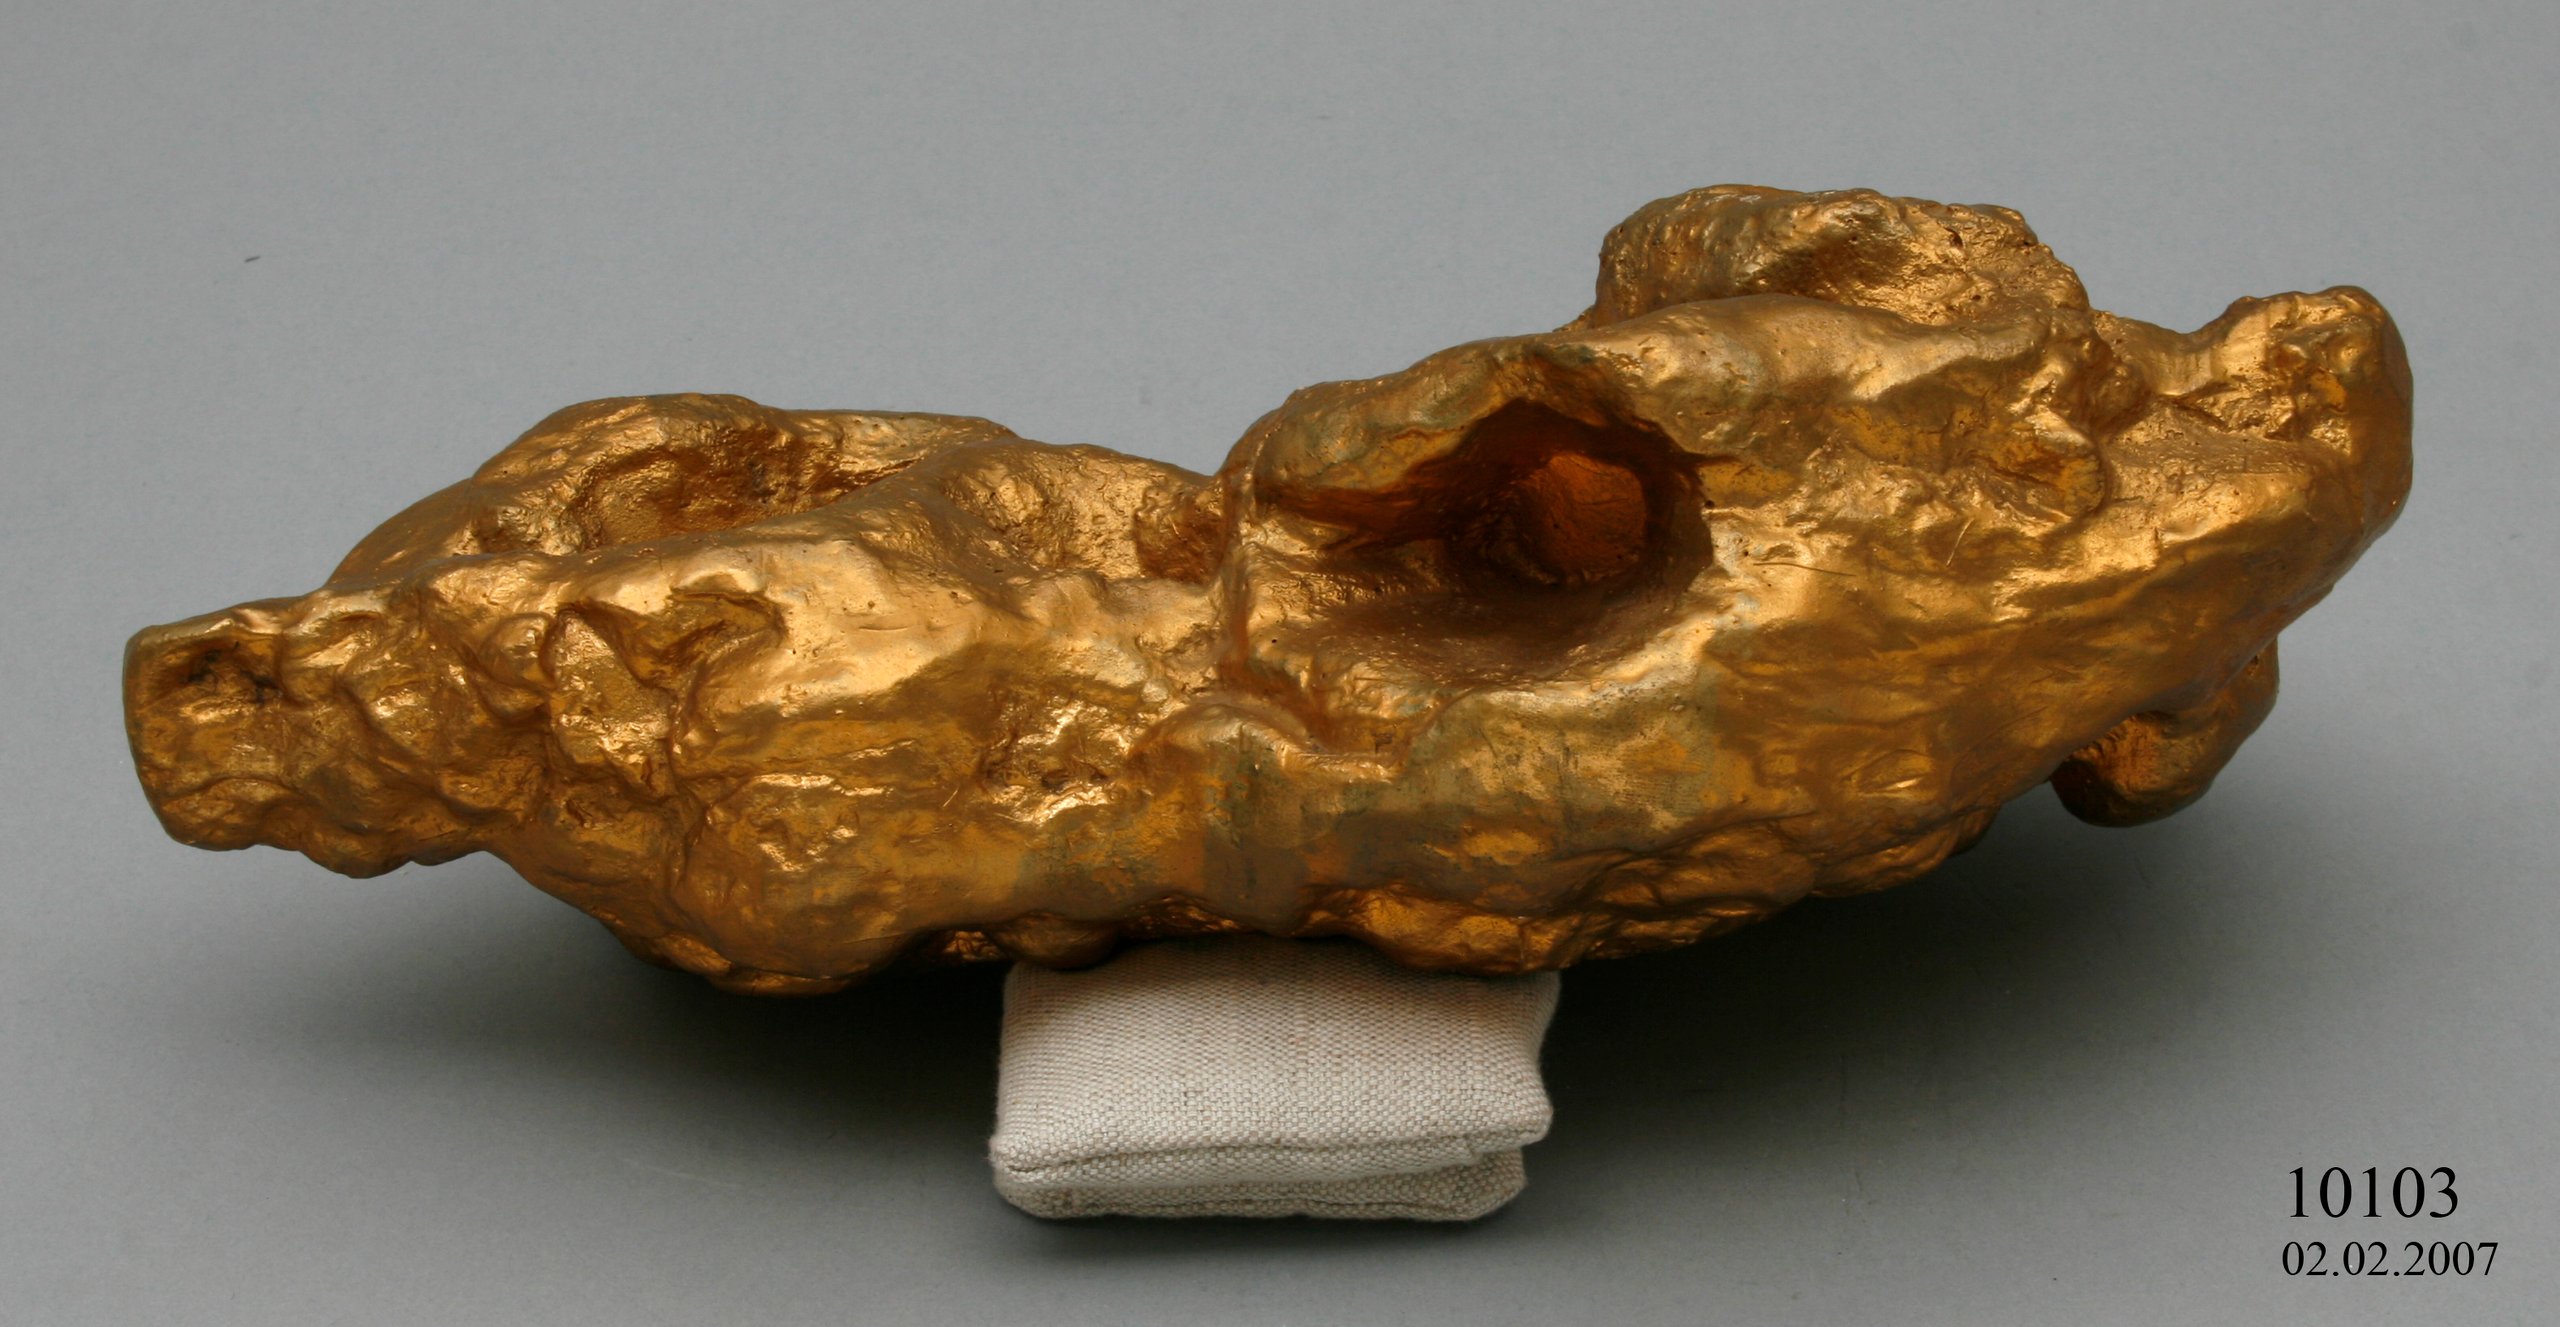 Model of the Precious Nugget discovered in Victoria in 1858